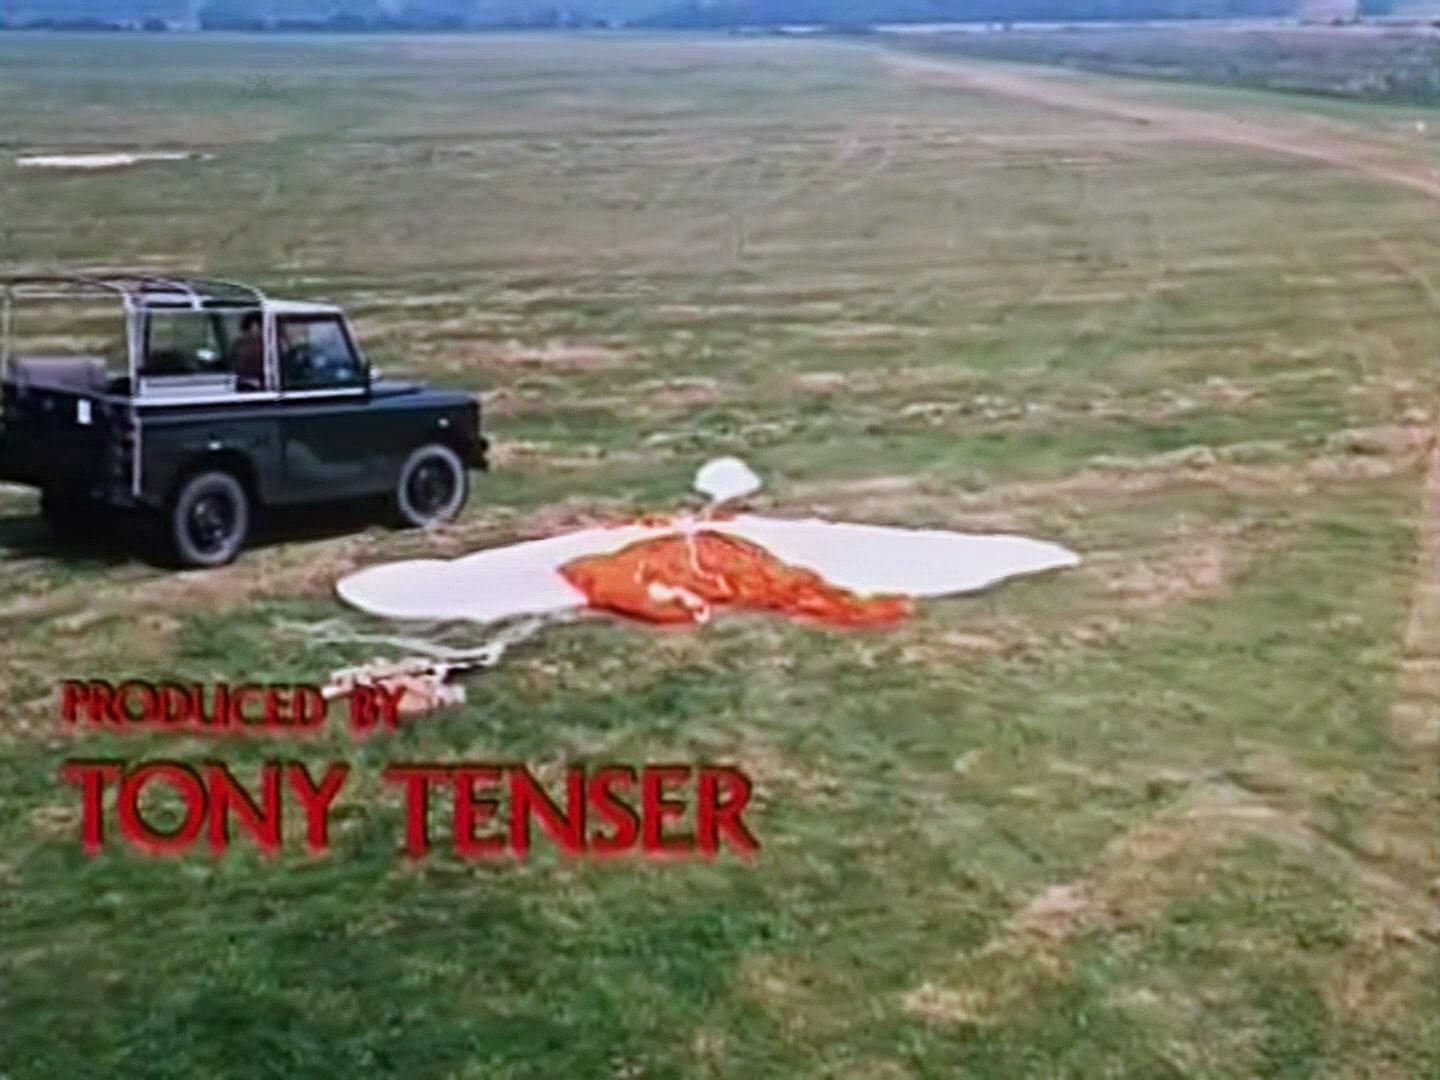 Main title from The Body Stealers (1969) (15). Produced by Tony Tenser